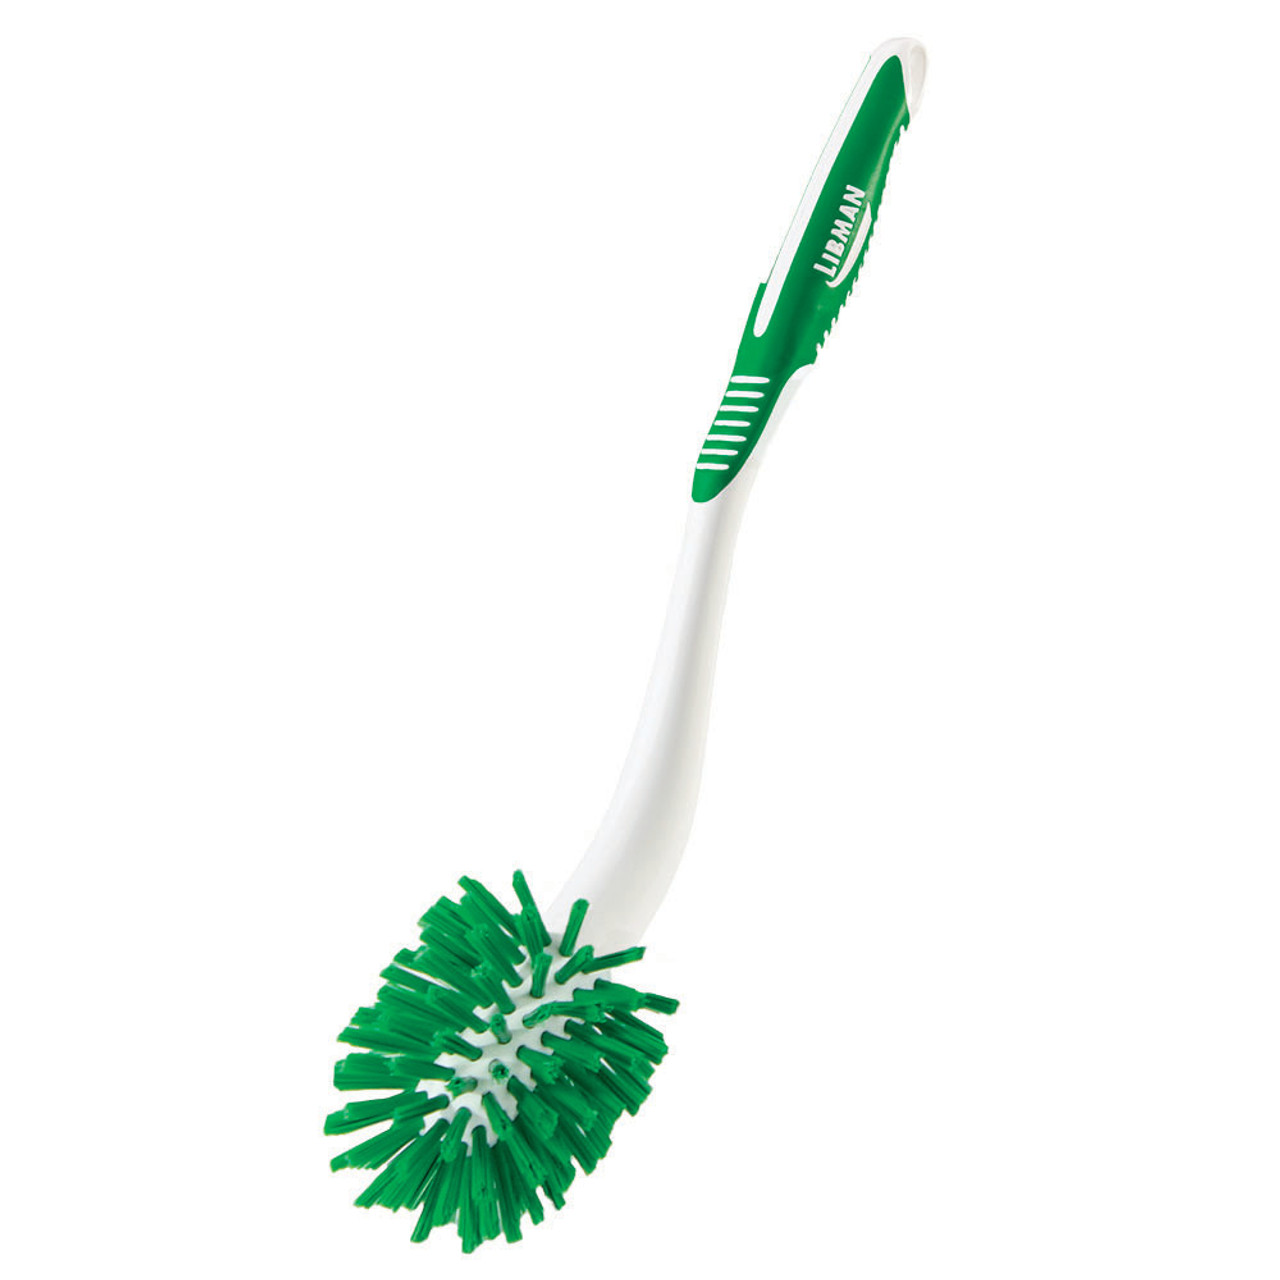 The Libman Large Angle Toilet Bowl Brush has tough bristles to get the tough stains out.